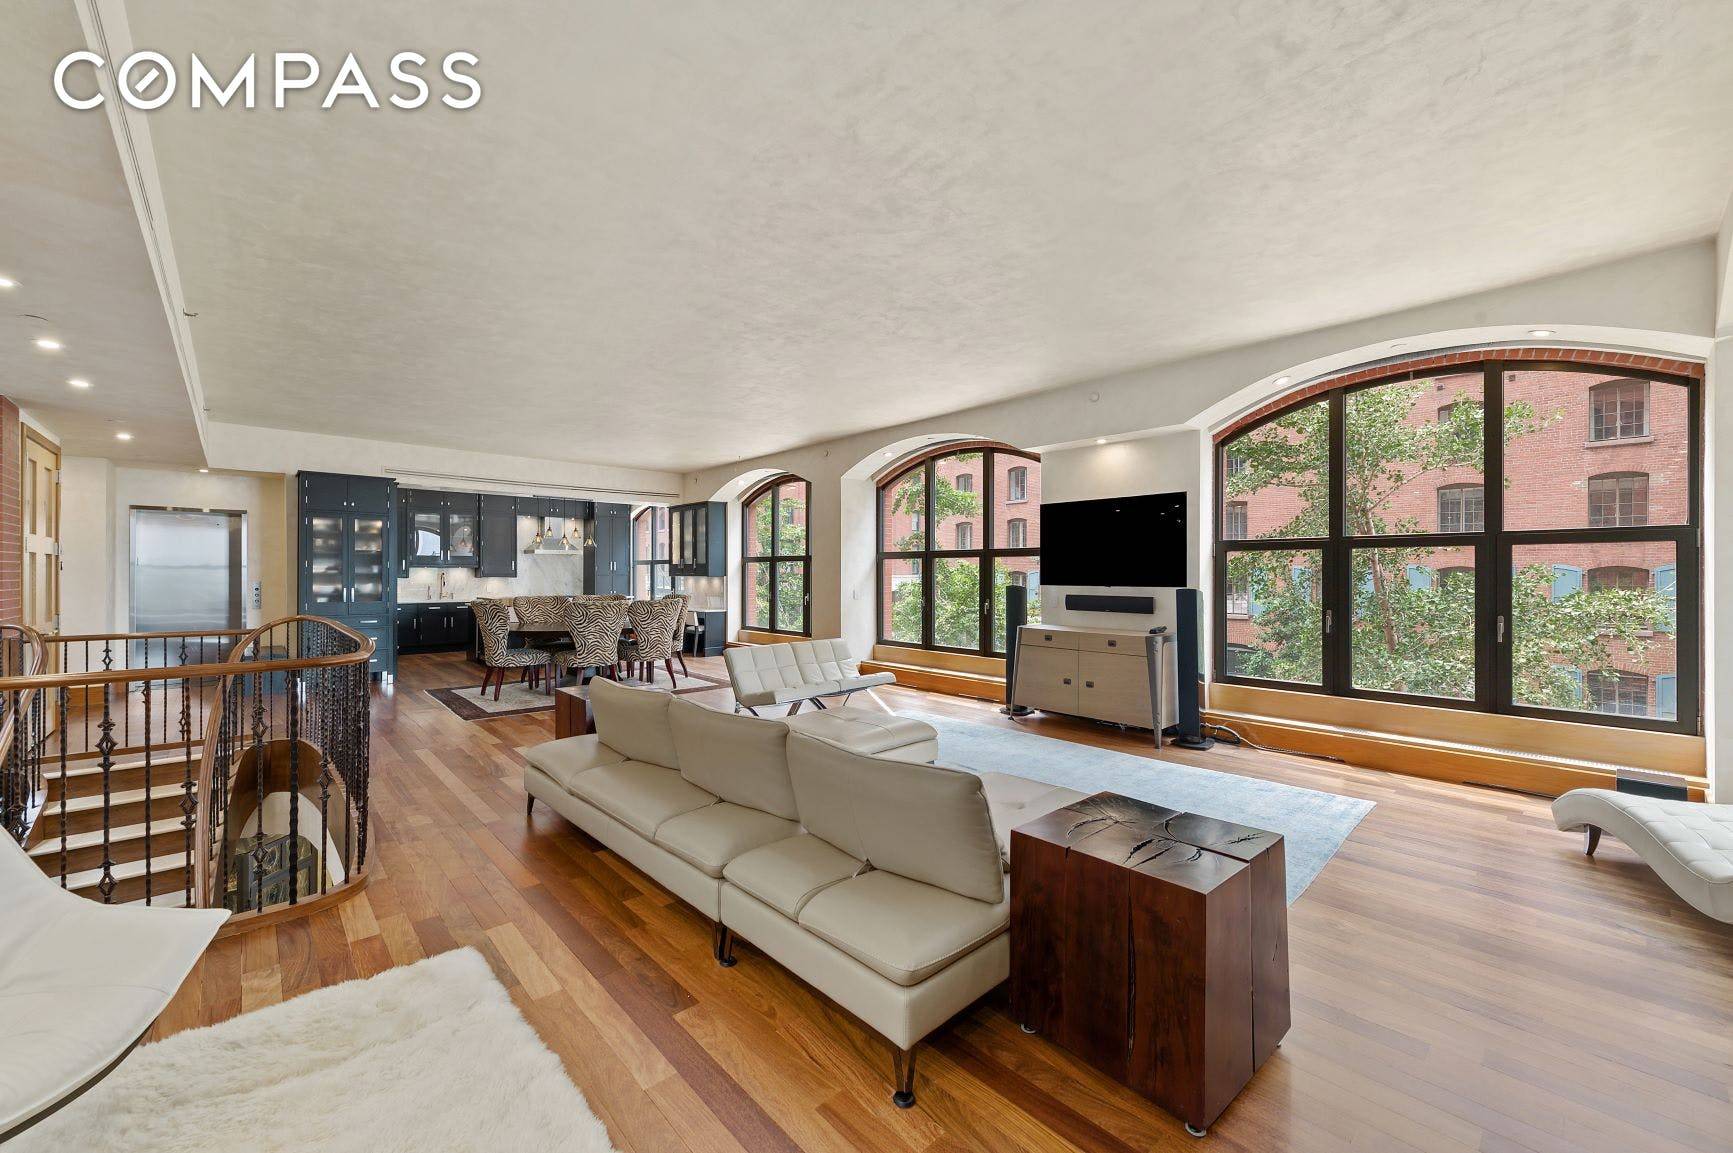 Situated in a prime North Tribeca historic district location, this grand triplex feels like a Soho loft.